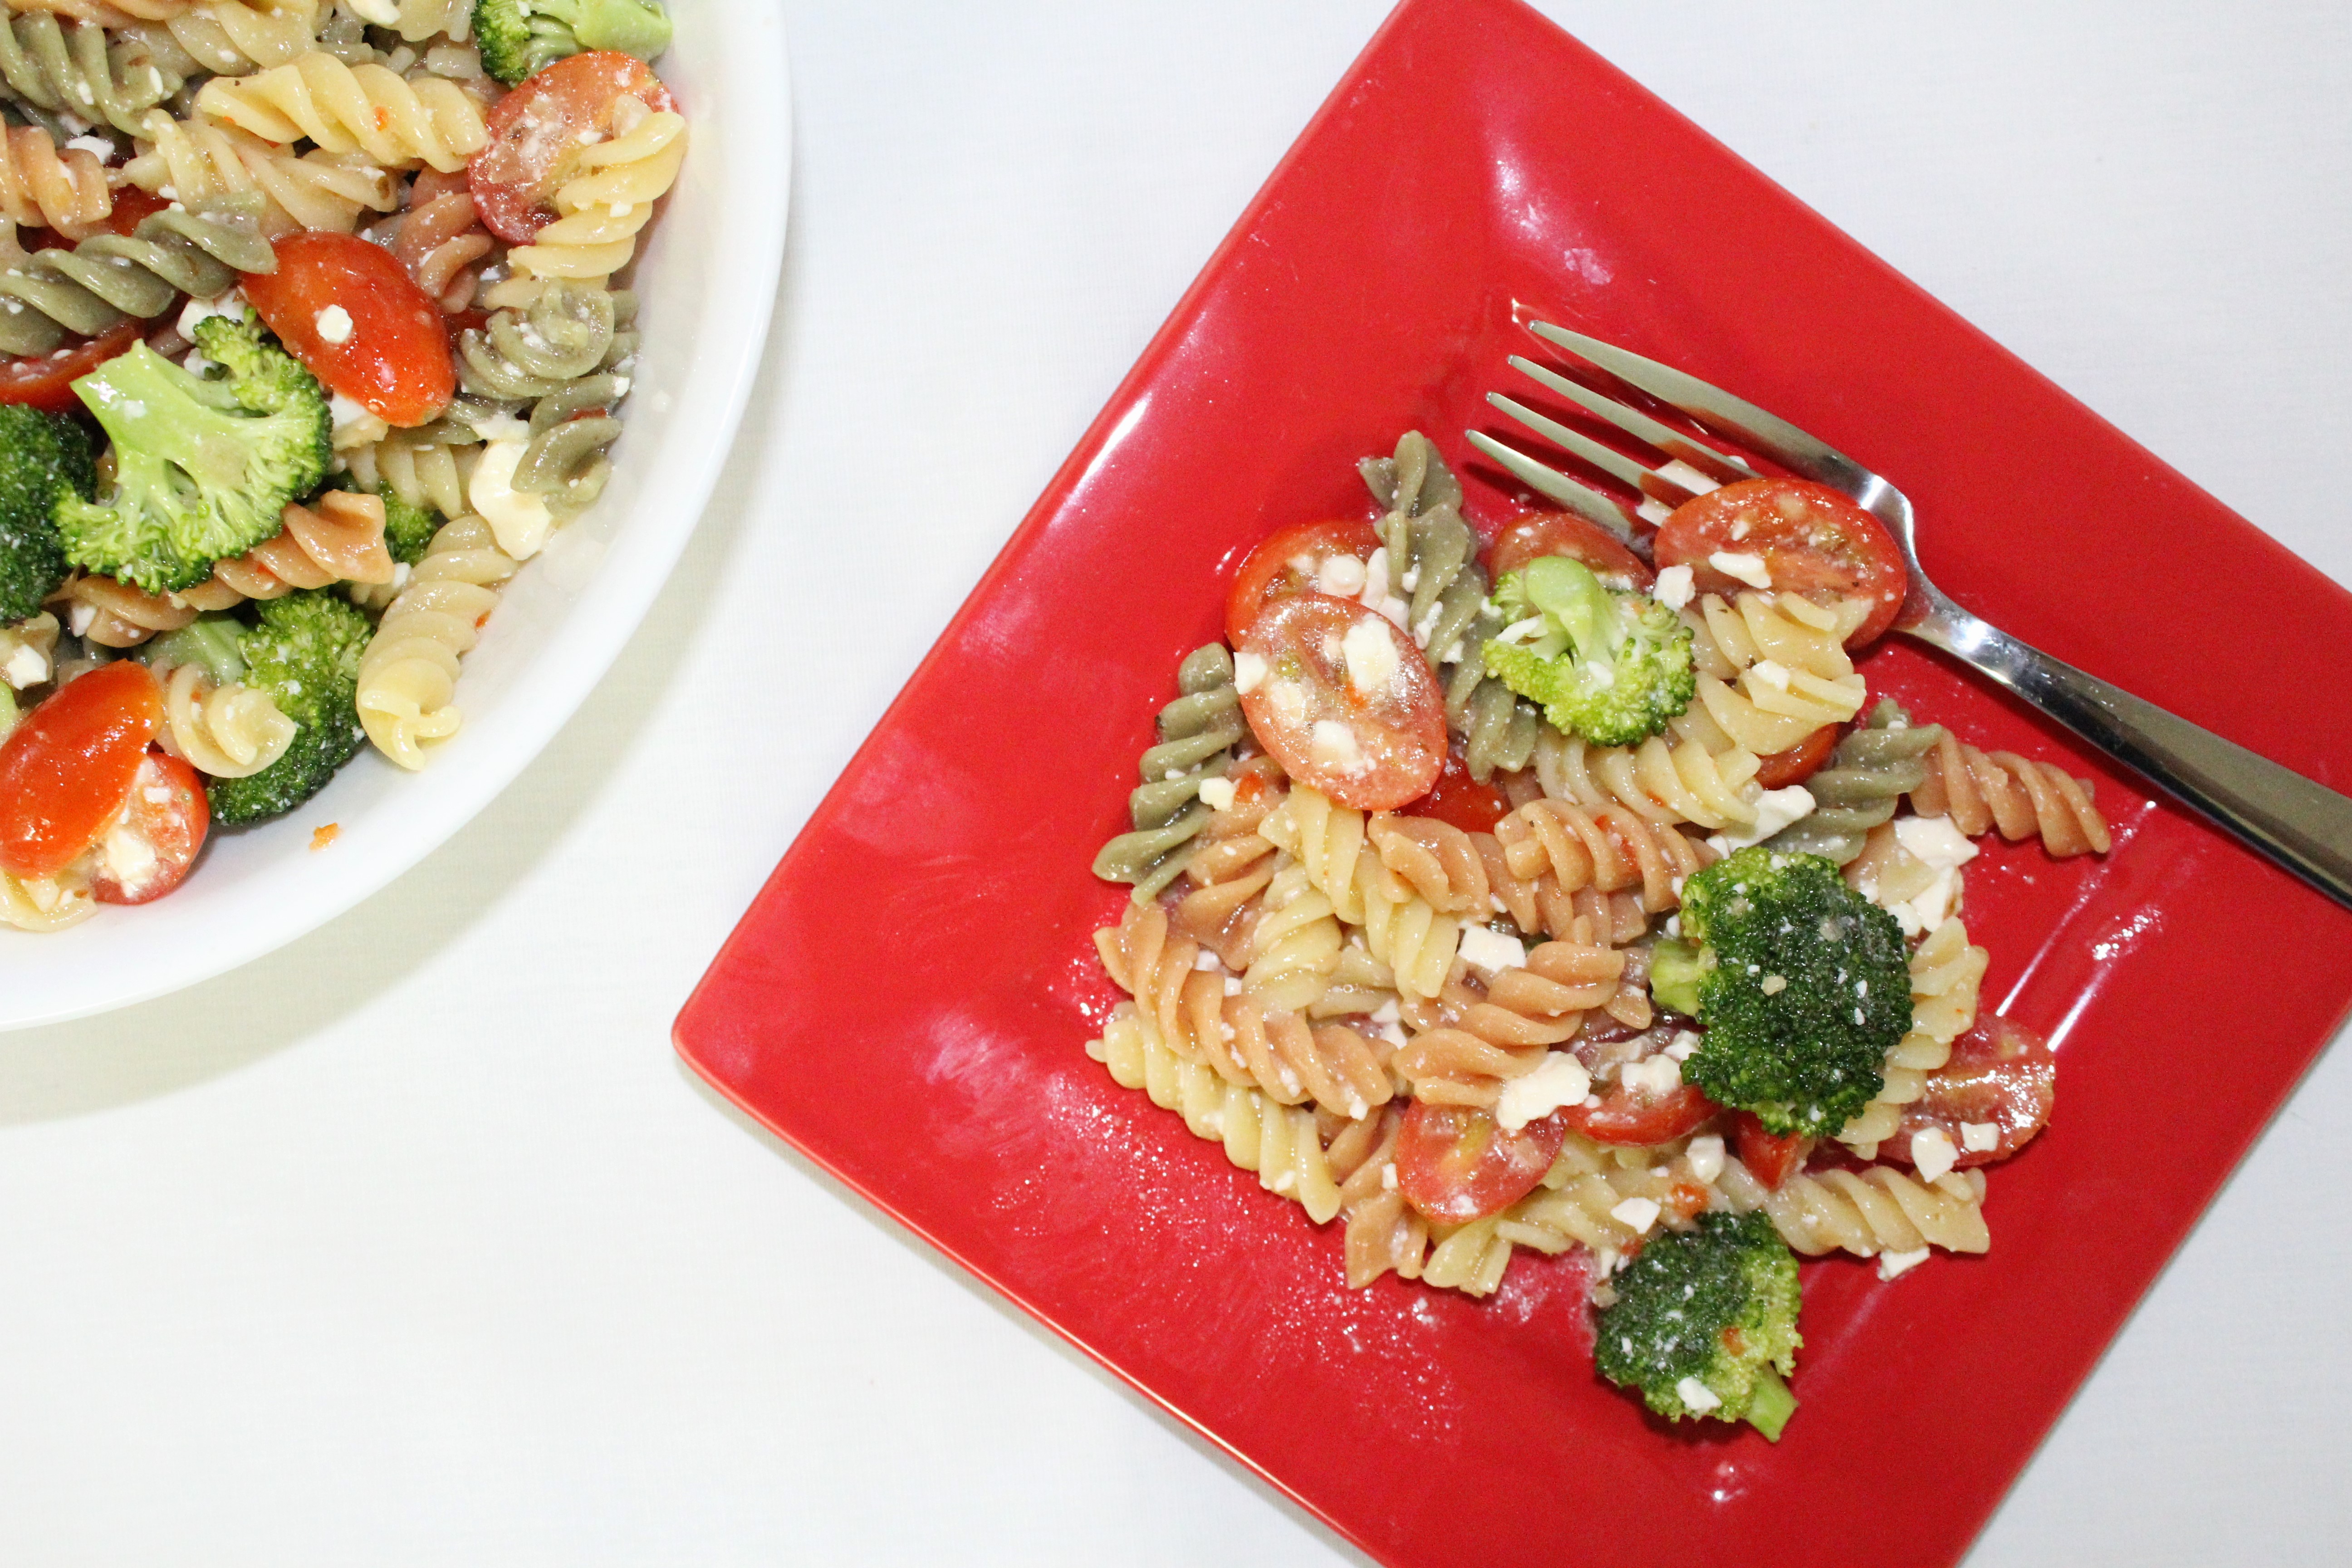 Are you looking for a quick and easy pasta salad? Well this is just the recipe for you, it is easy and versatile.